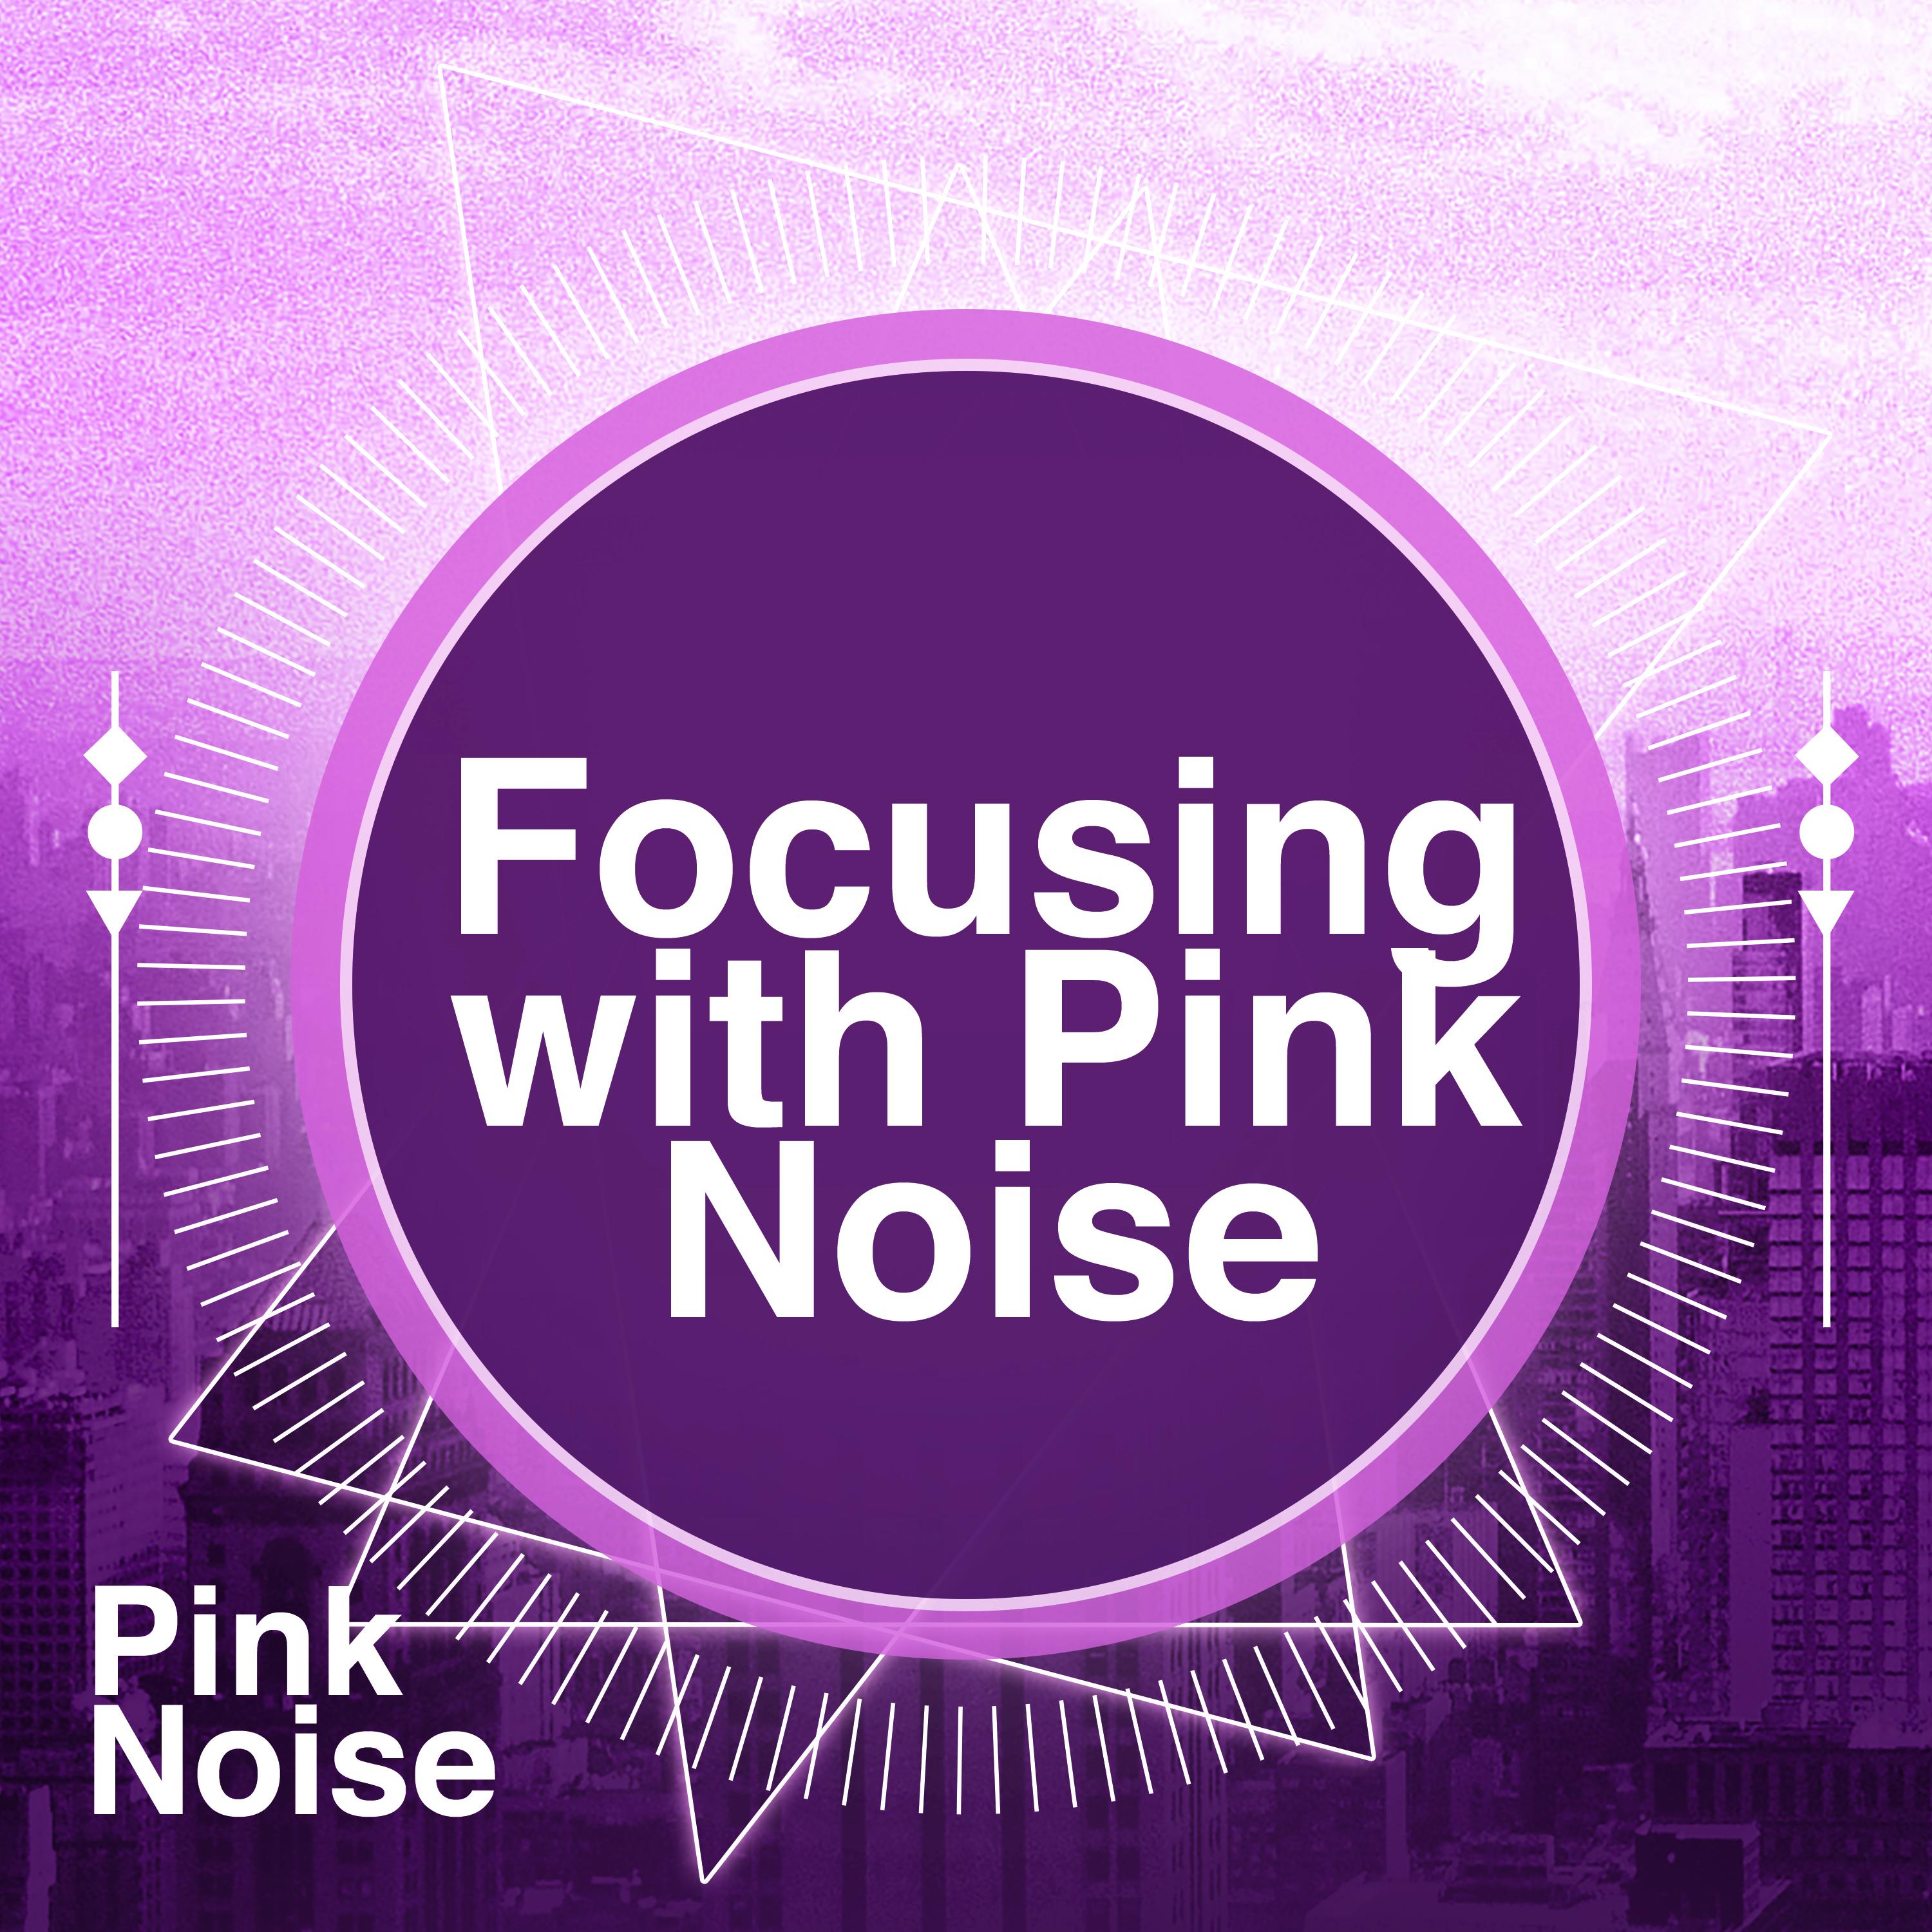 Focusing with Pink Noise